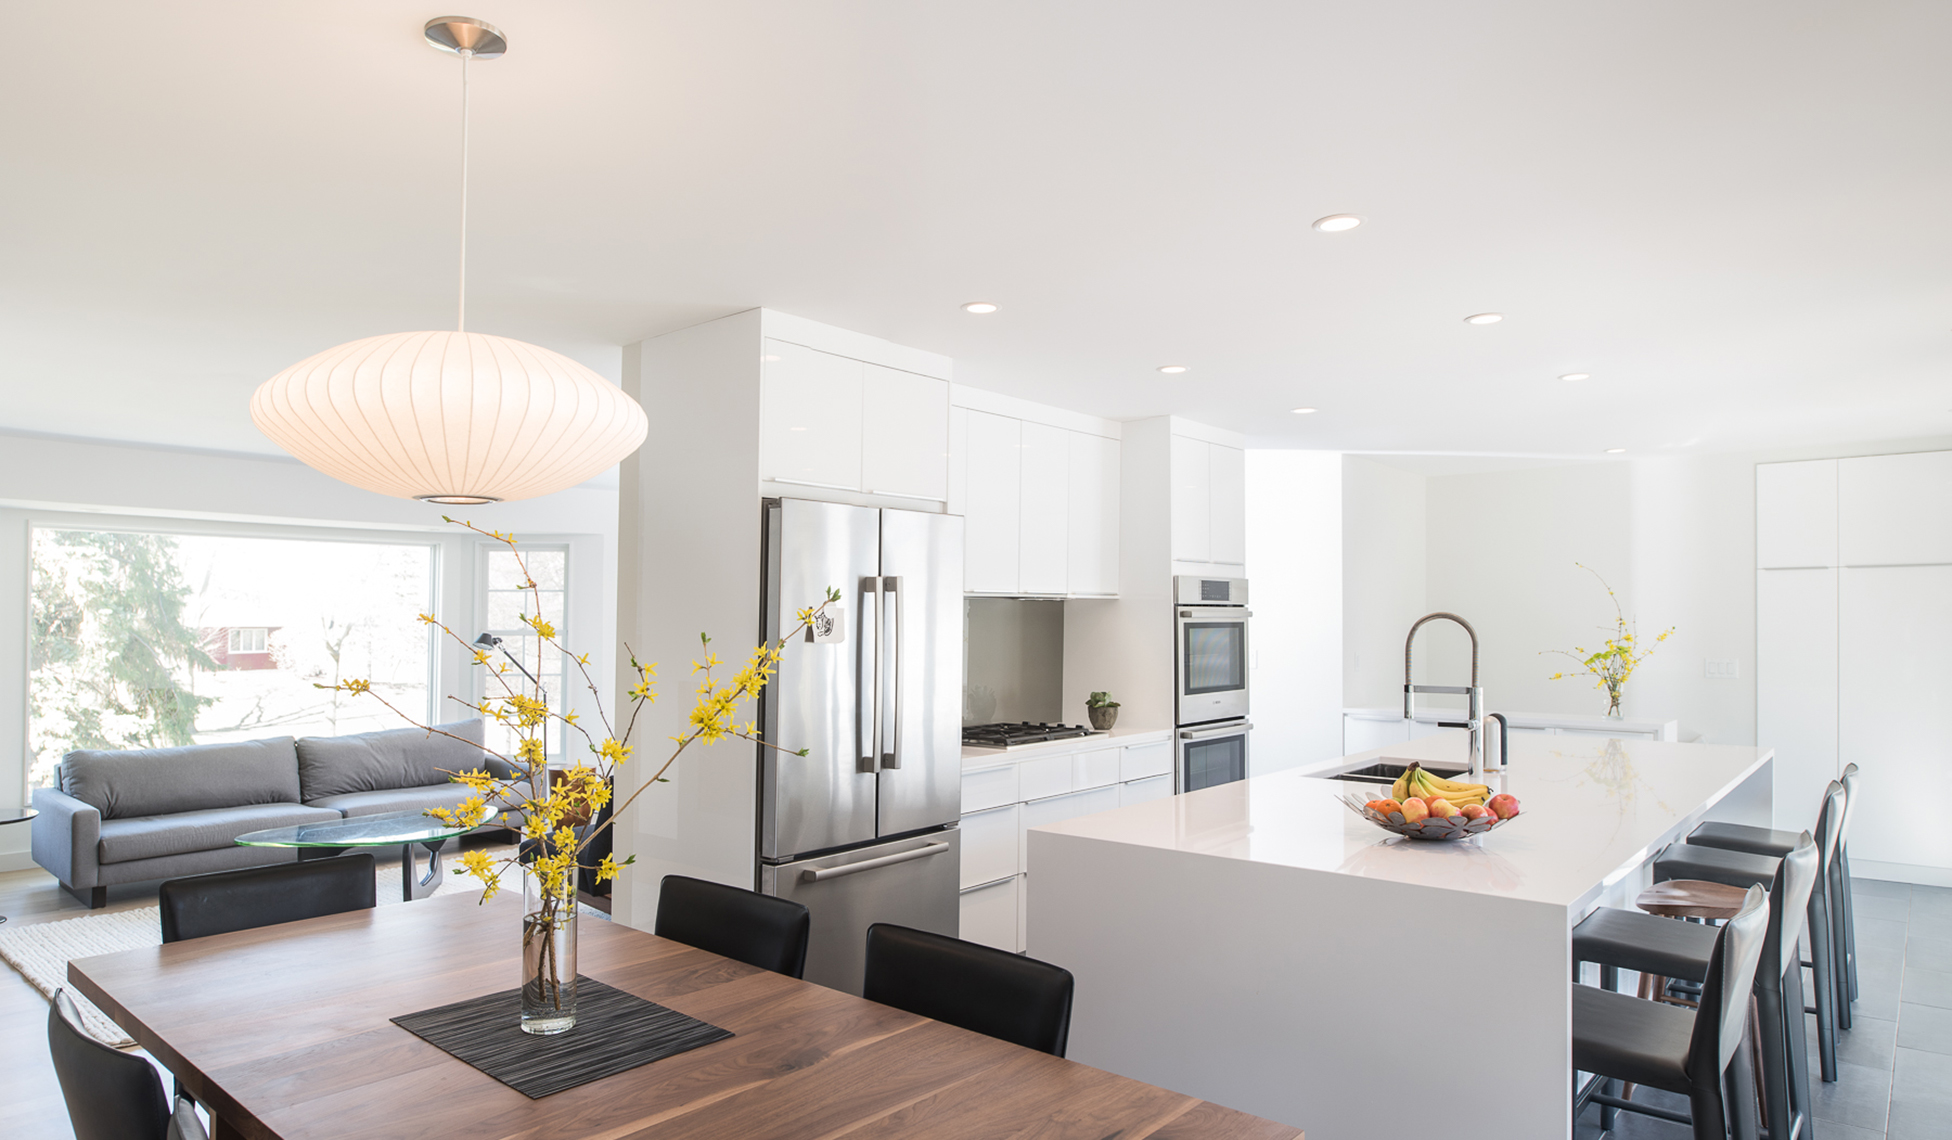 Modern dining area within bright white kitchen